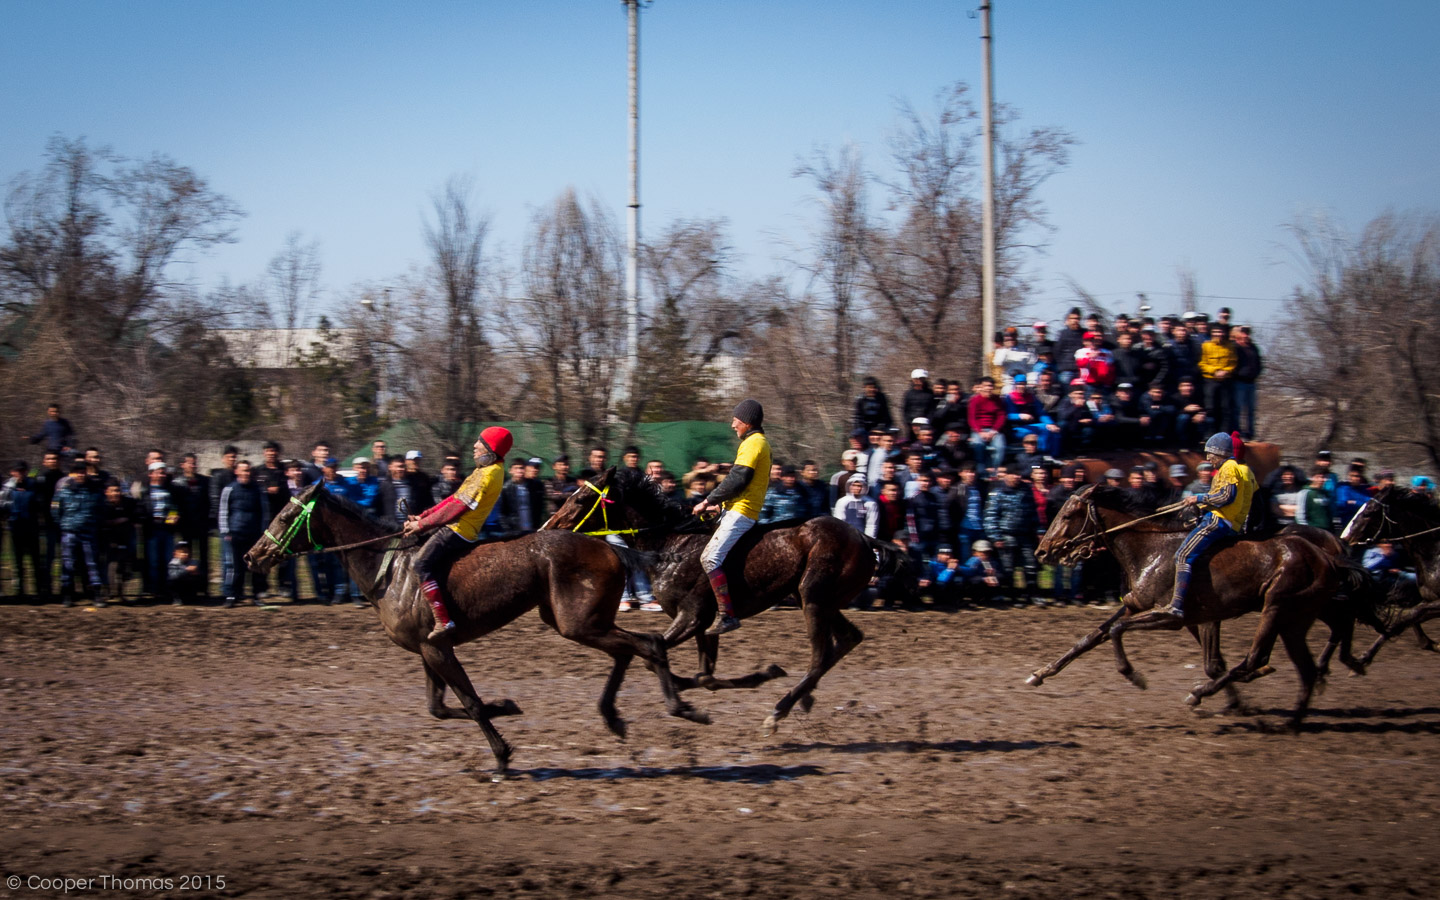 Young riders struggle to control their horses in the first race of the day